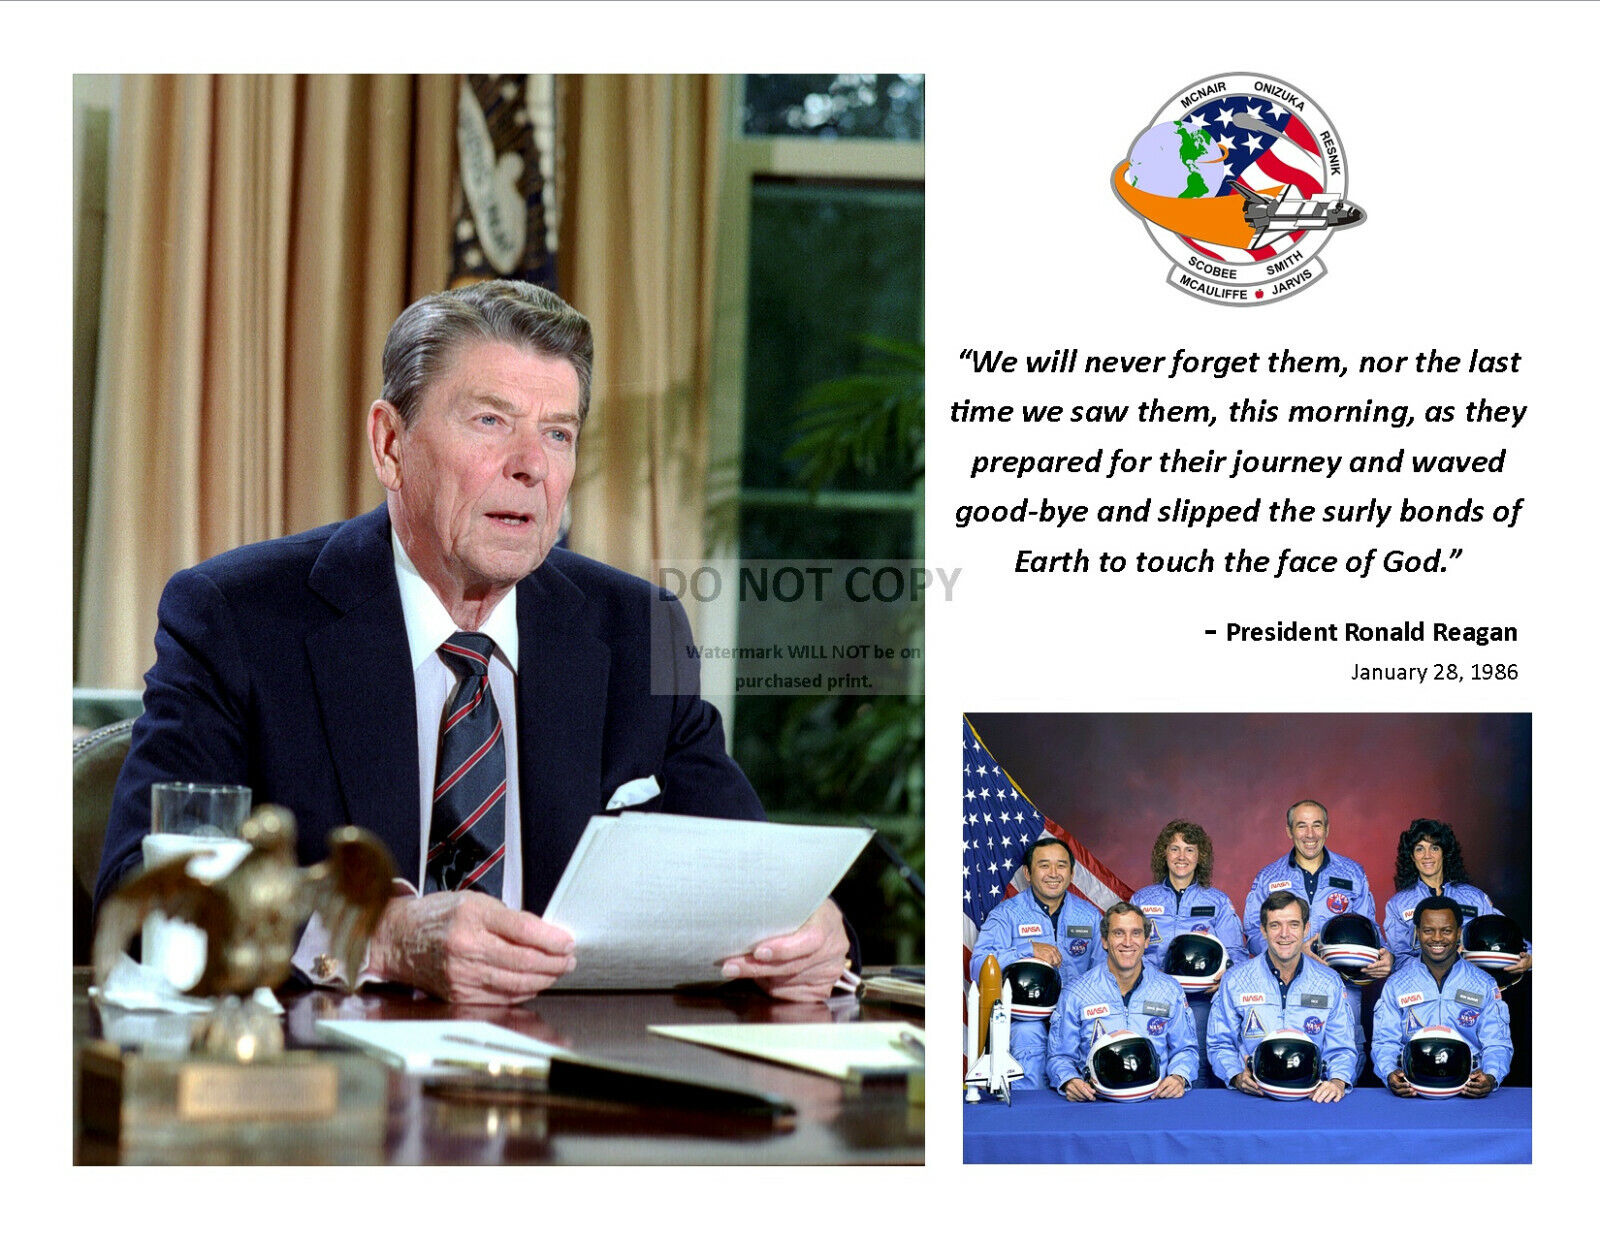 RONALD REAGAN TRIBUTE QUOTE TO THE CHALLENGER ASTRONAUTS - 8X10 PHOTO (PQ-056)